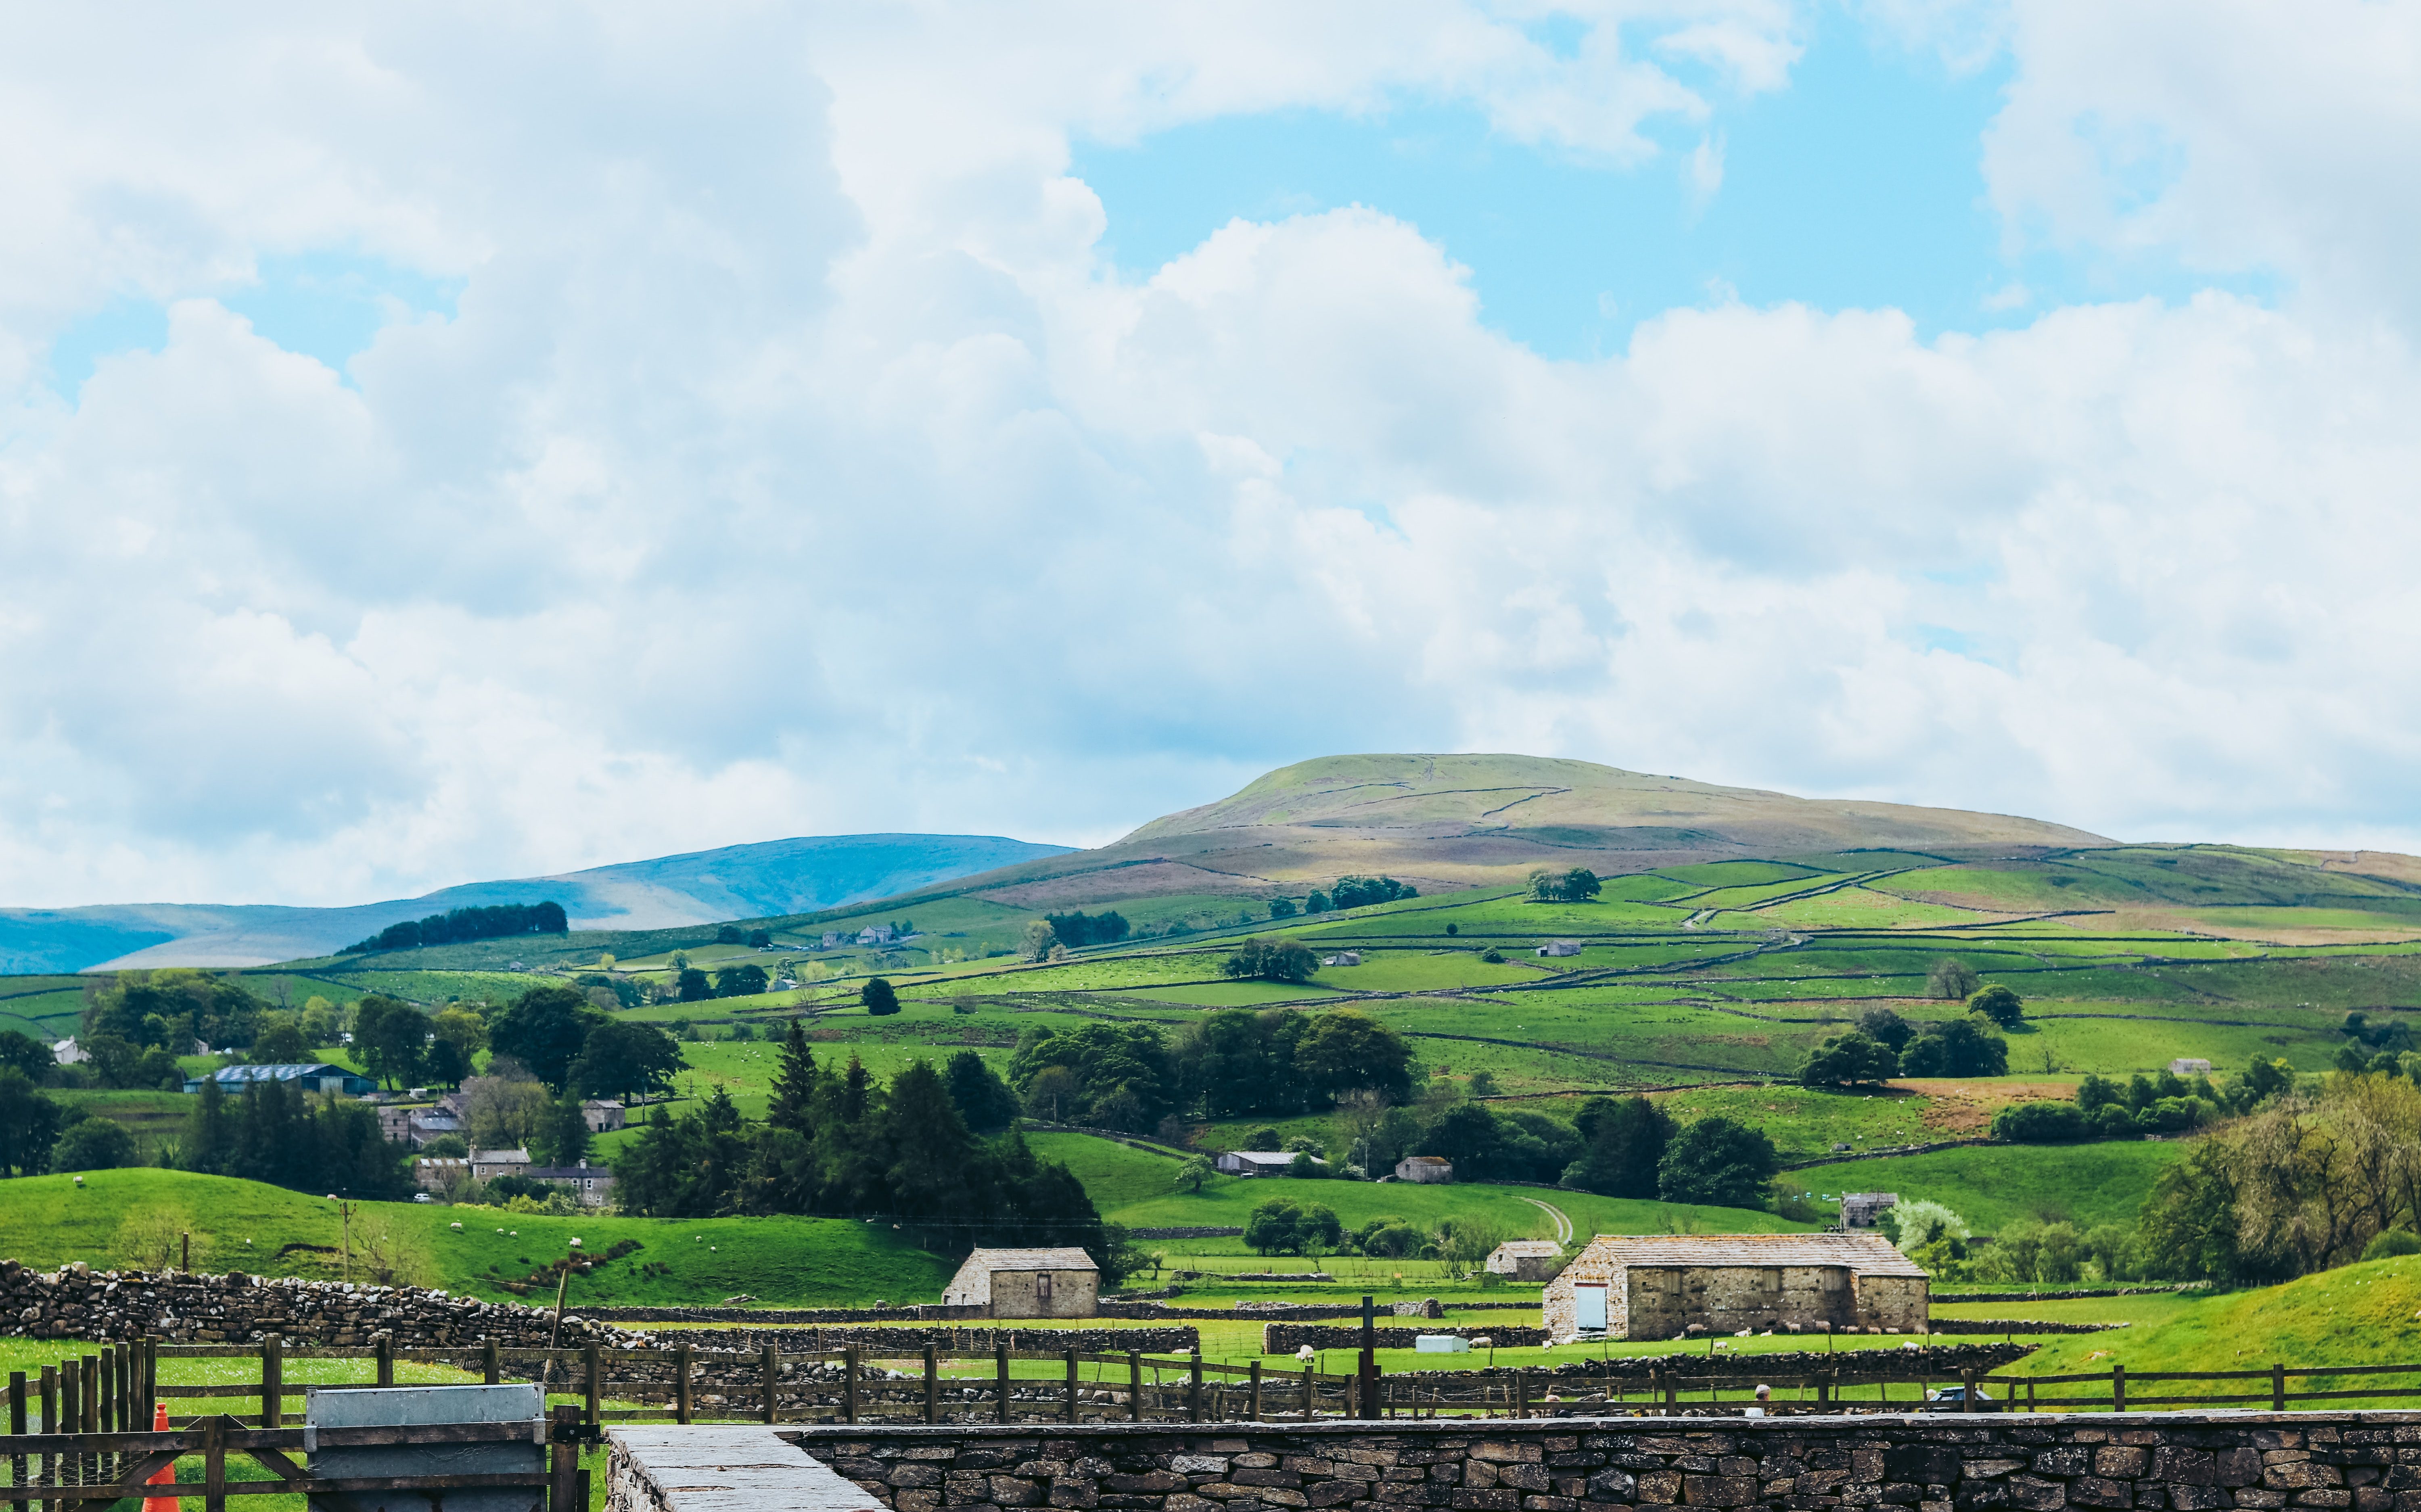 Yorkshire Folk Are Needed For ‘Major New Feature Film’ In The Yorkshire Dales